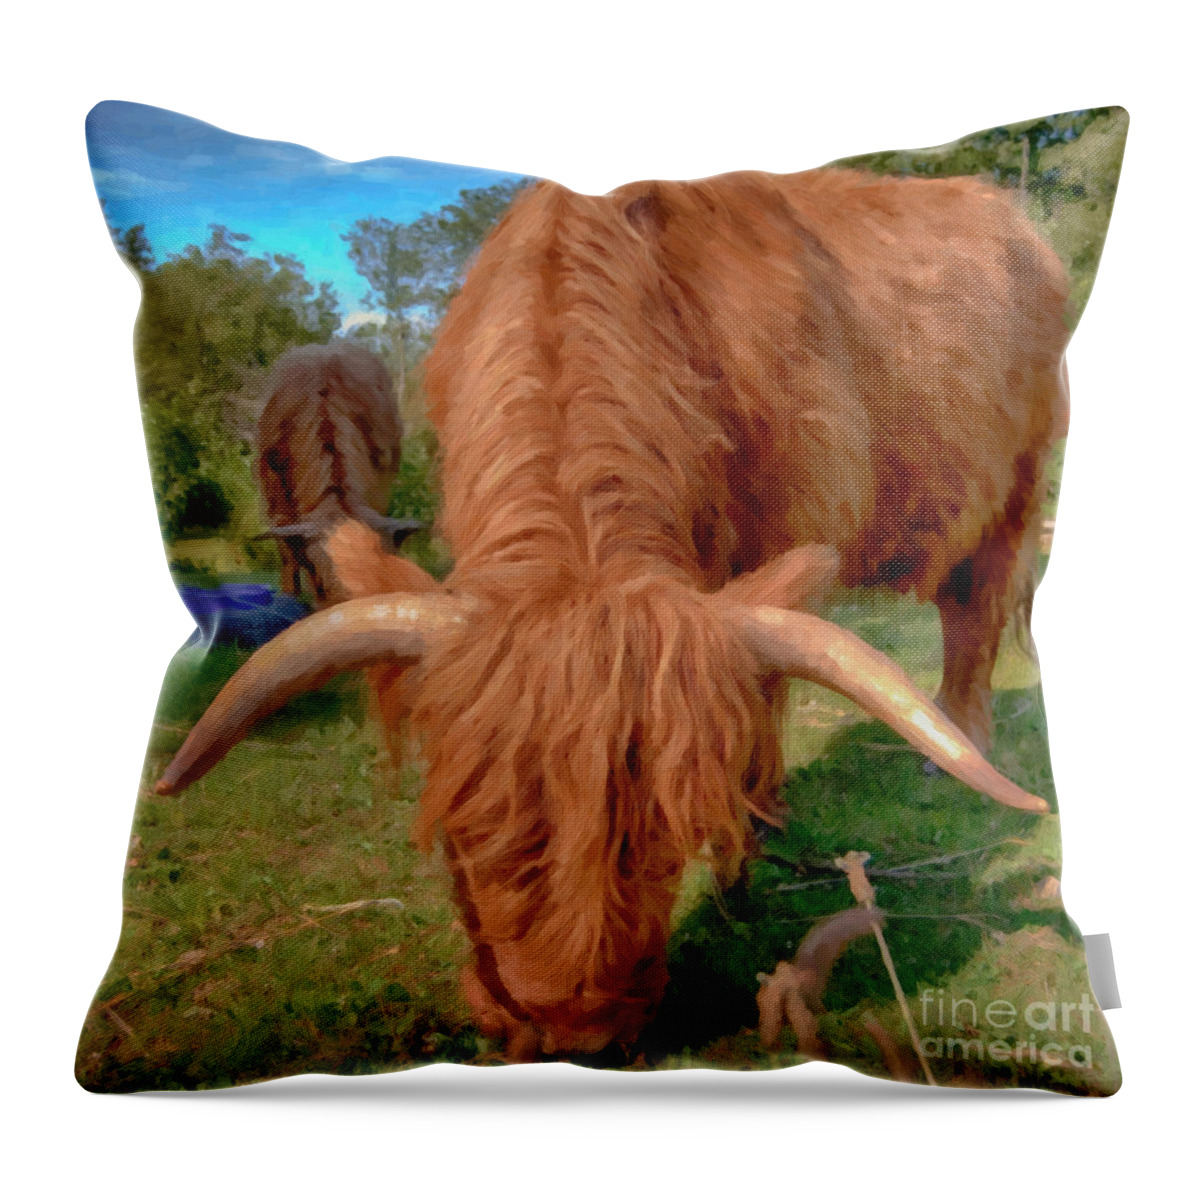 Alone Throw Pillow featuring the painting Highland Cow Painting by Antony McAulay